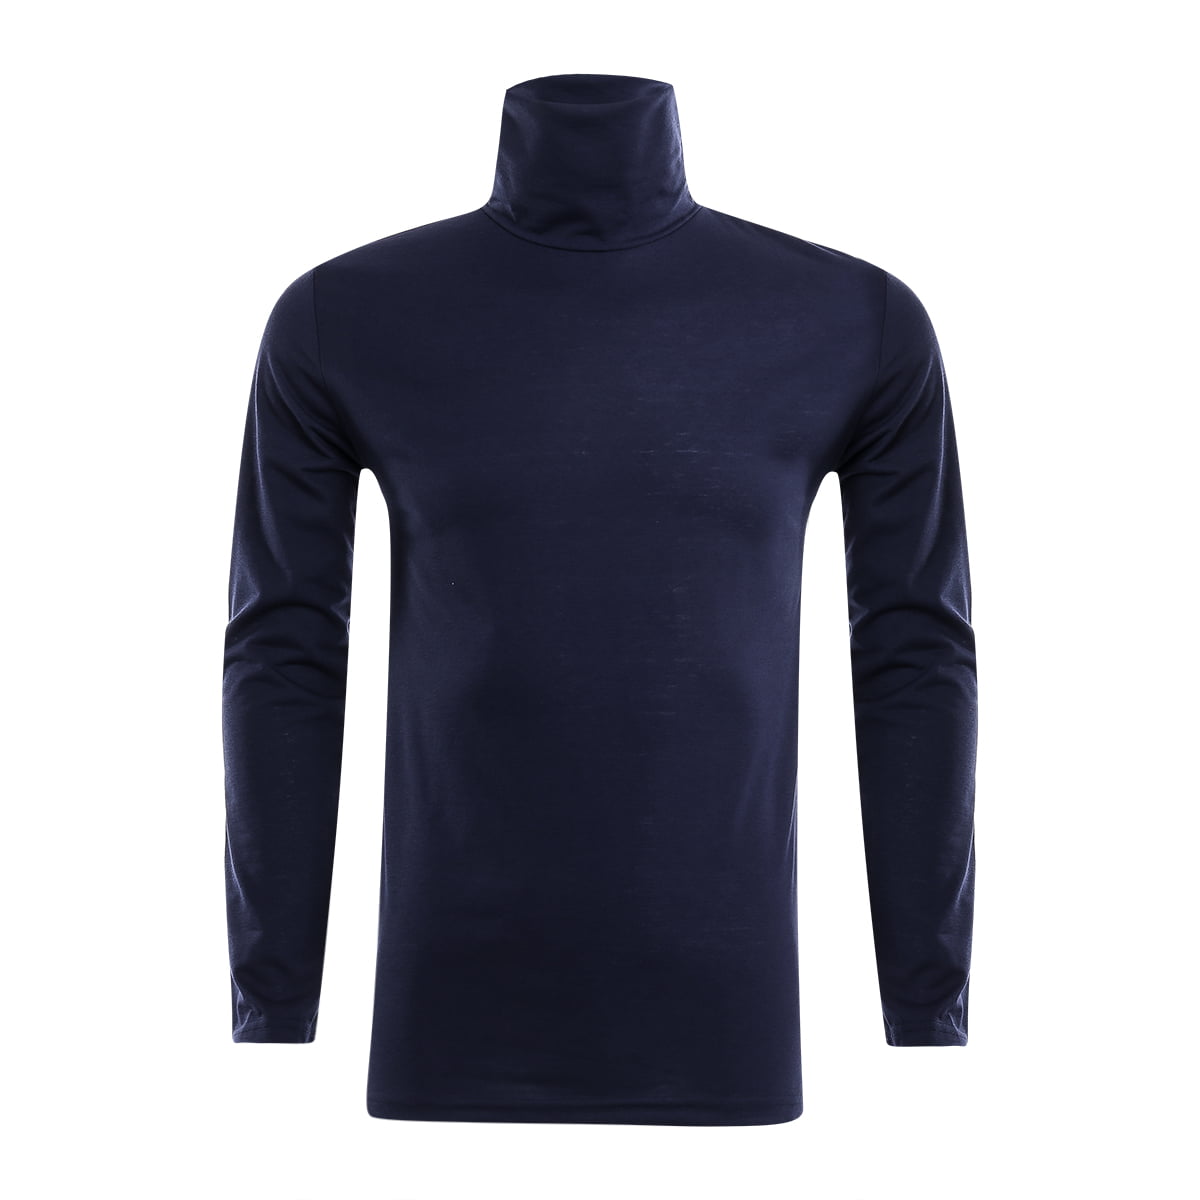 One opening Fashion Mens Thermal Cotton Turtle Roll Neck Skivvy ...